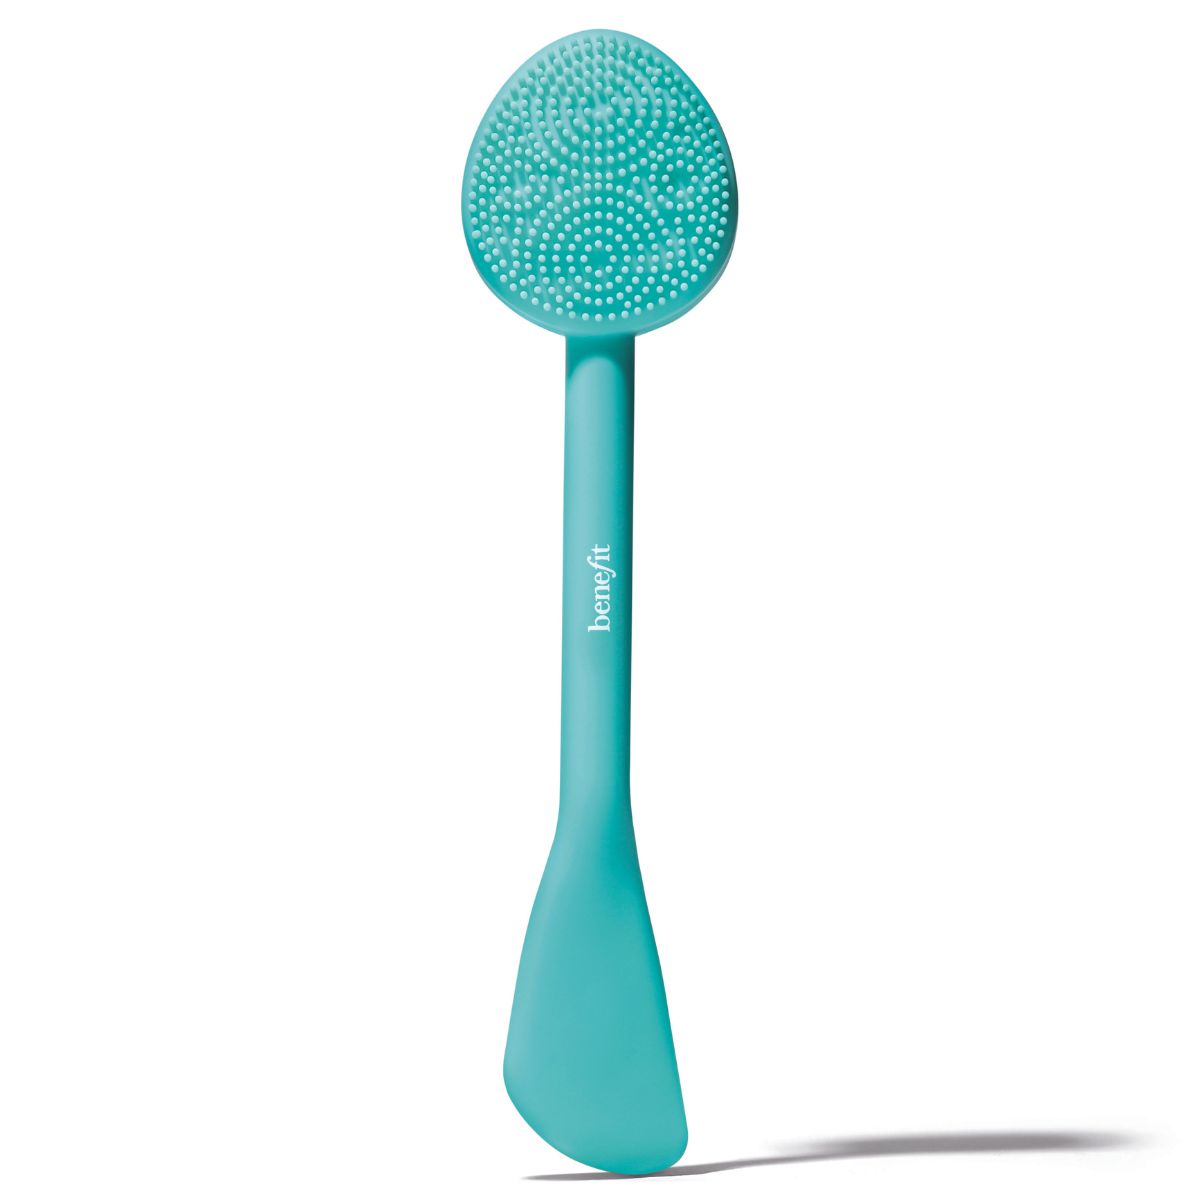 Benefit All in One Mask Wand Silicone Mask & Cleansing Tool